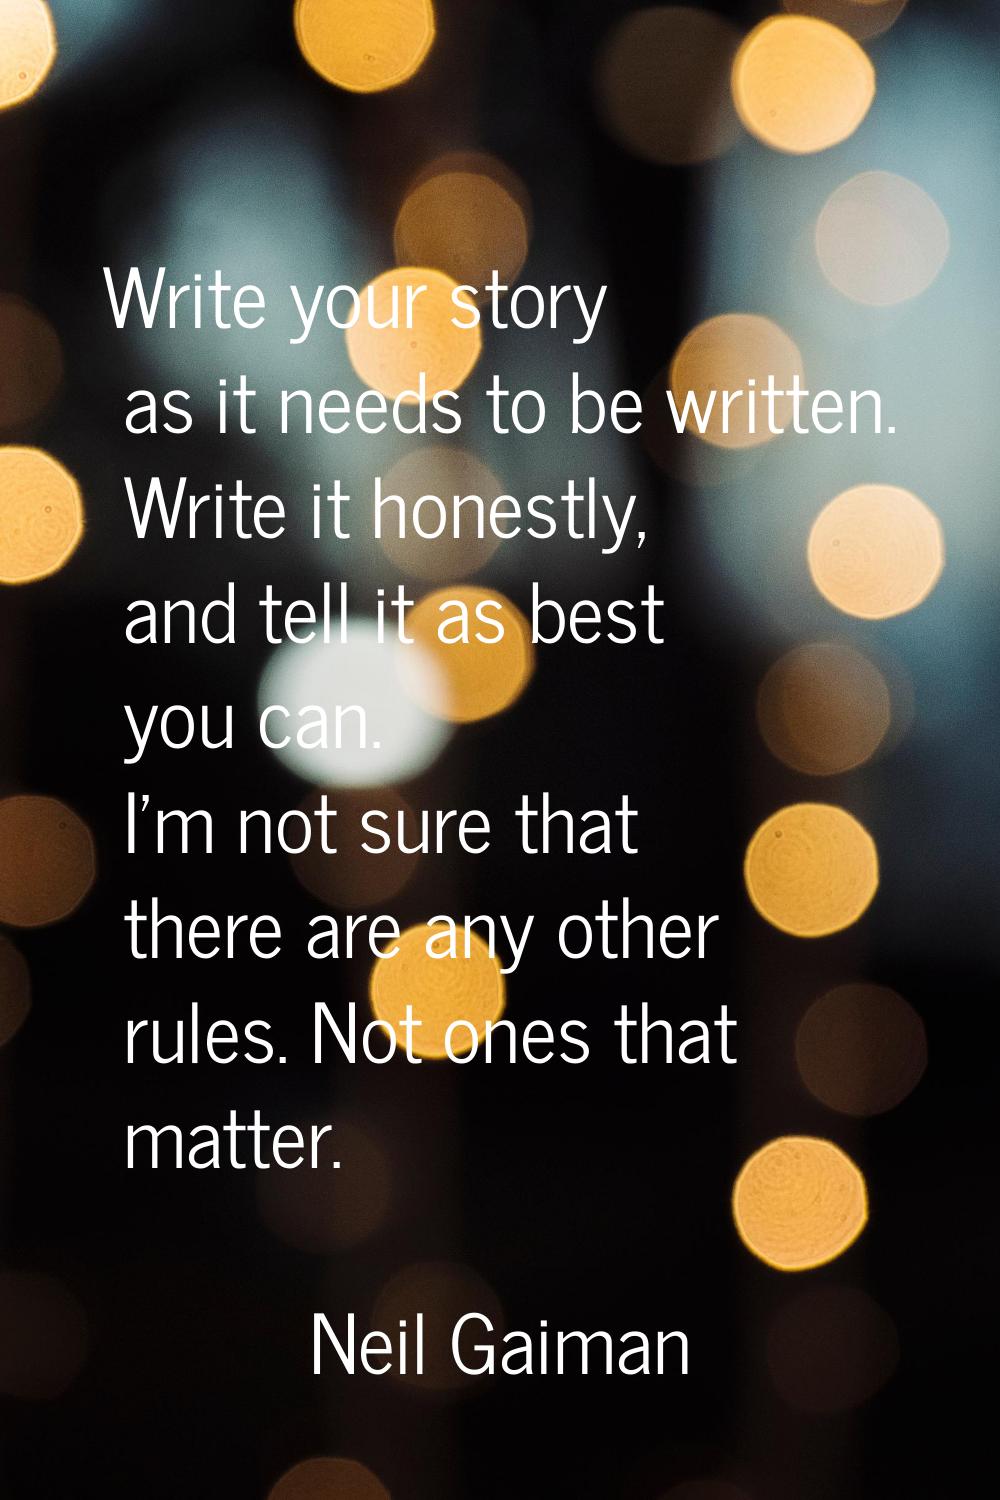 Write your story as it needs to be written. Write it honestly, and tell it as best you can. I'm not